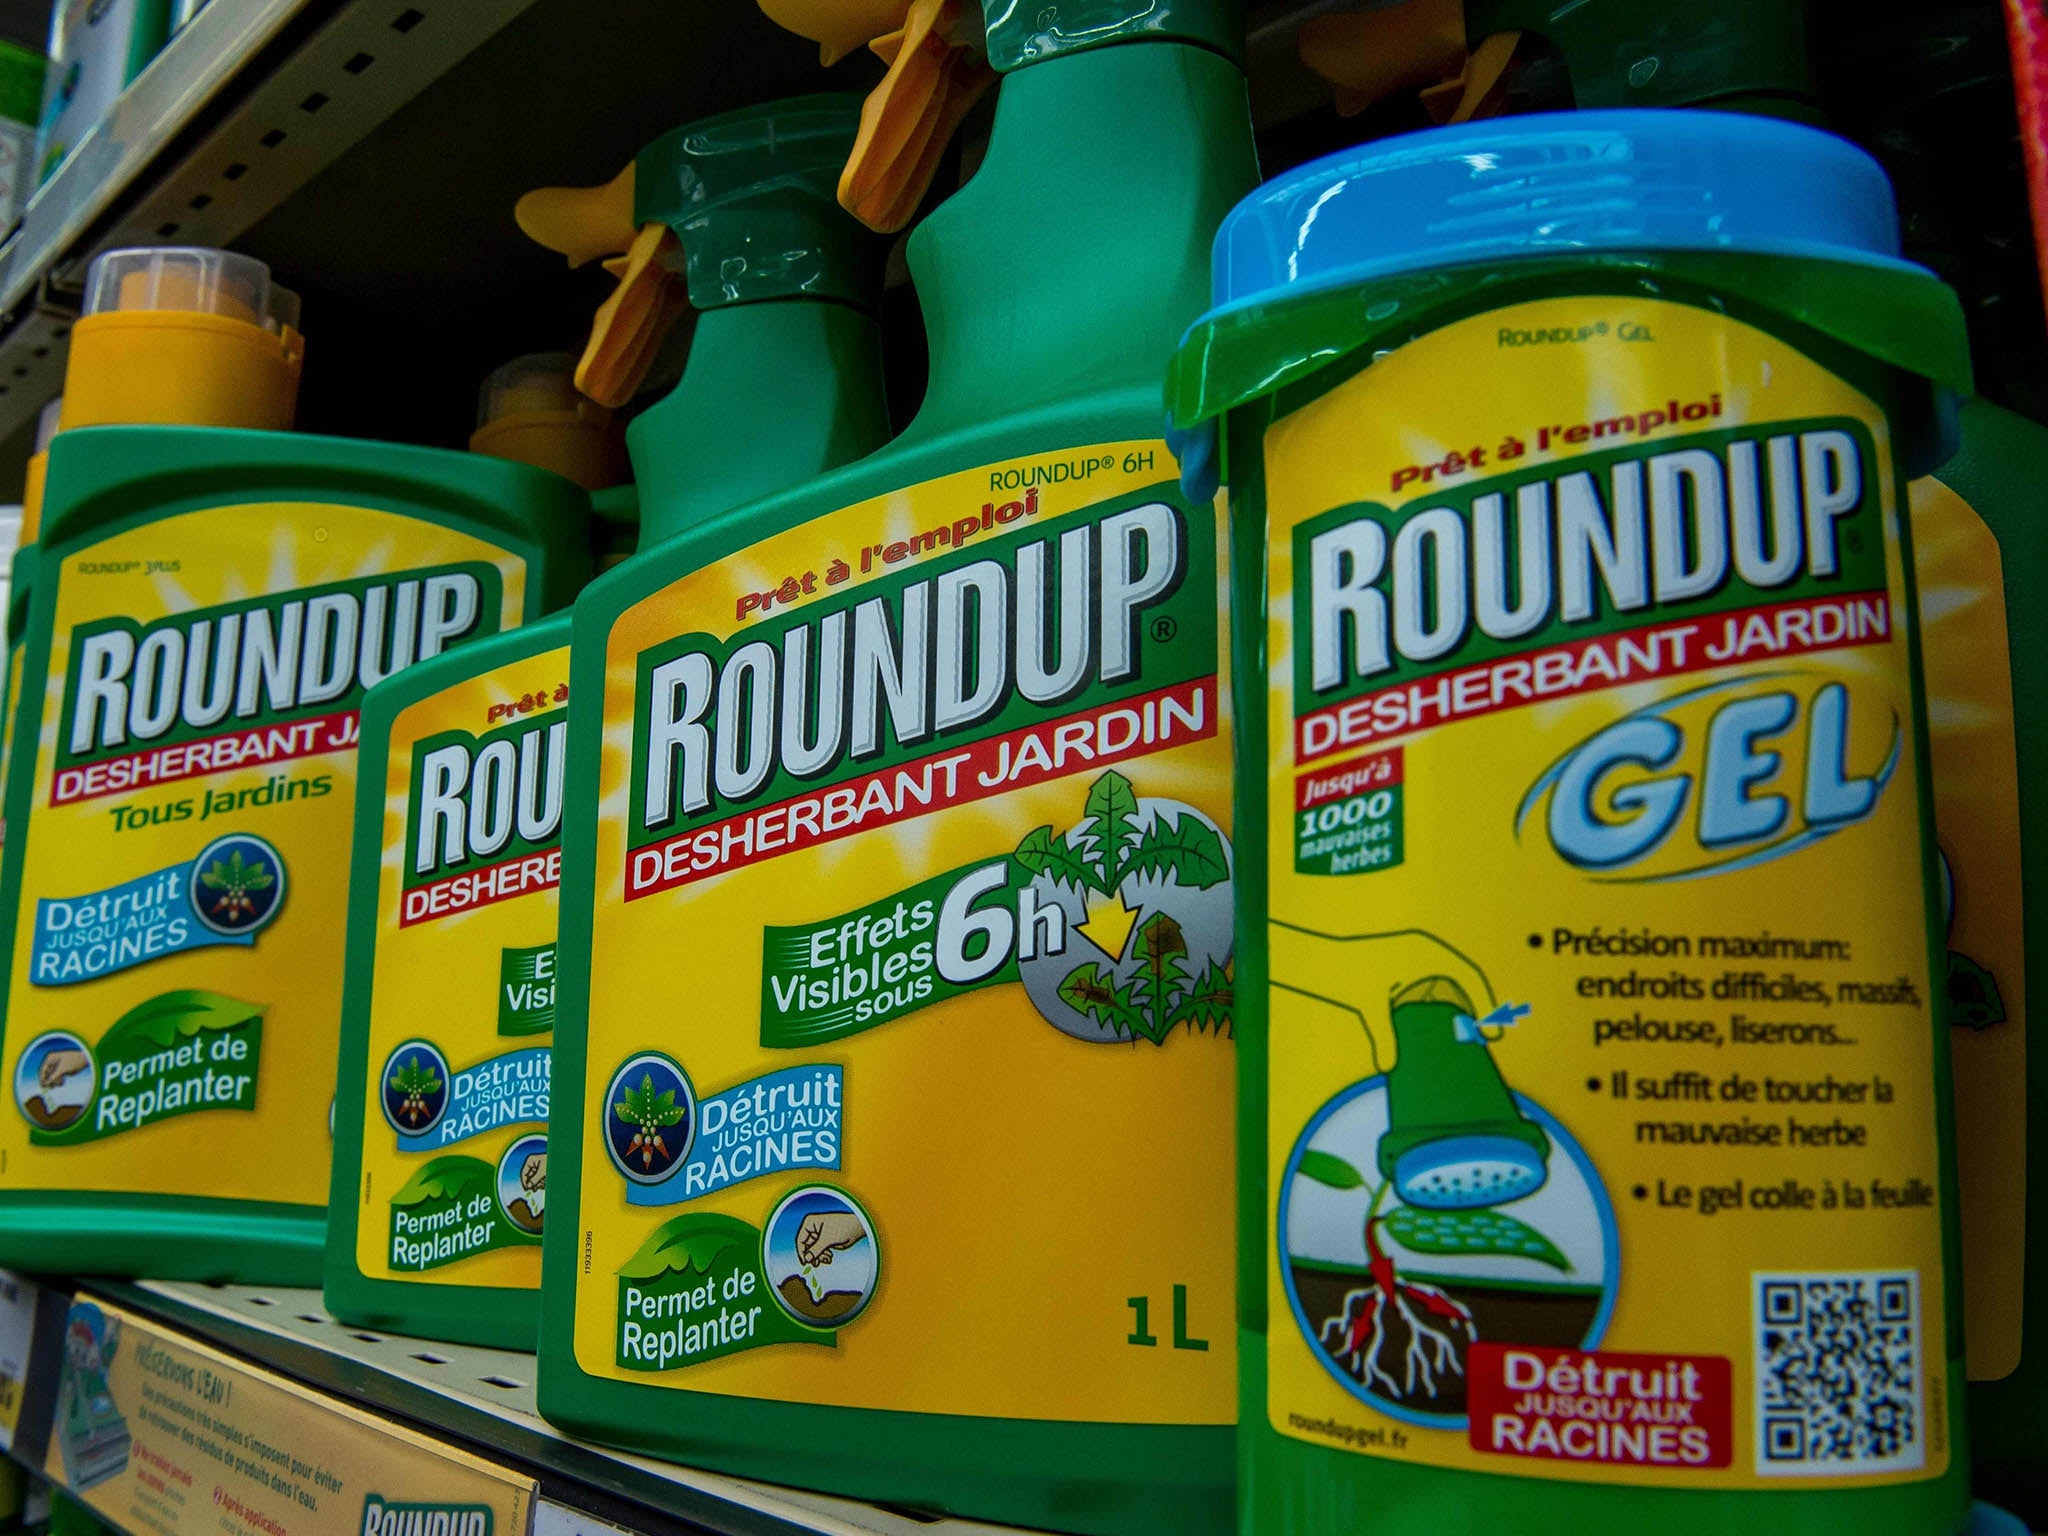 Roundup is one of the world's most common weed killers